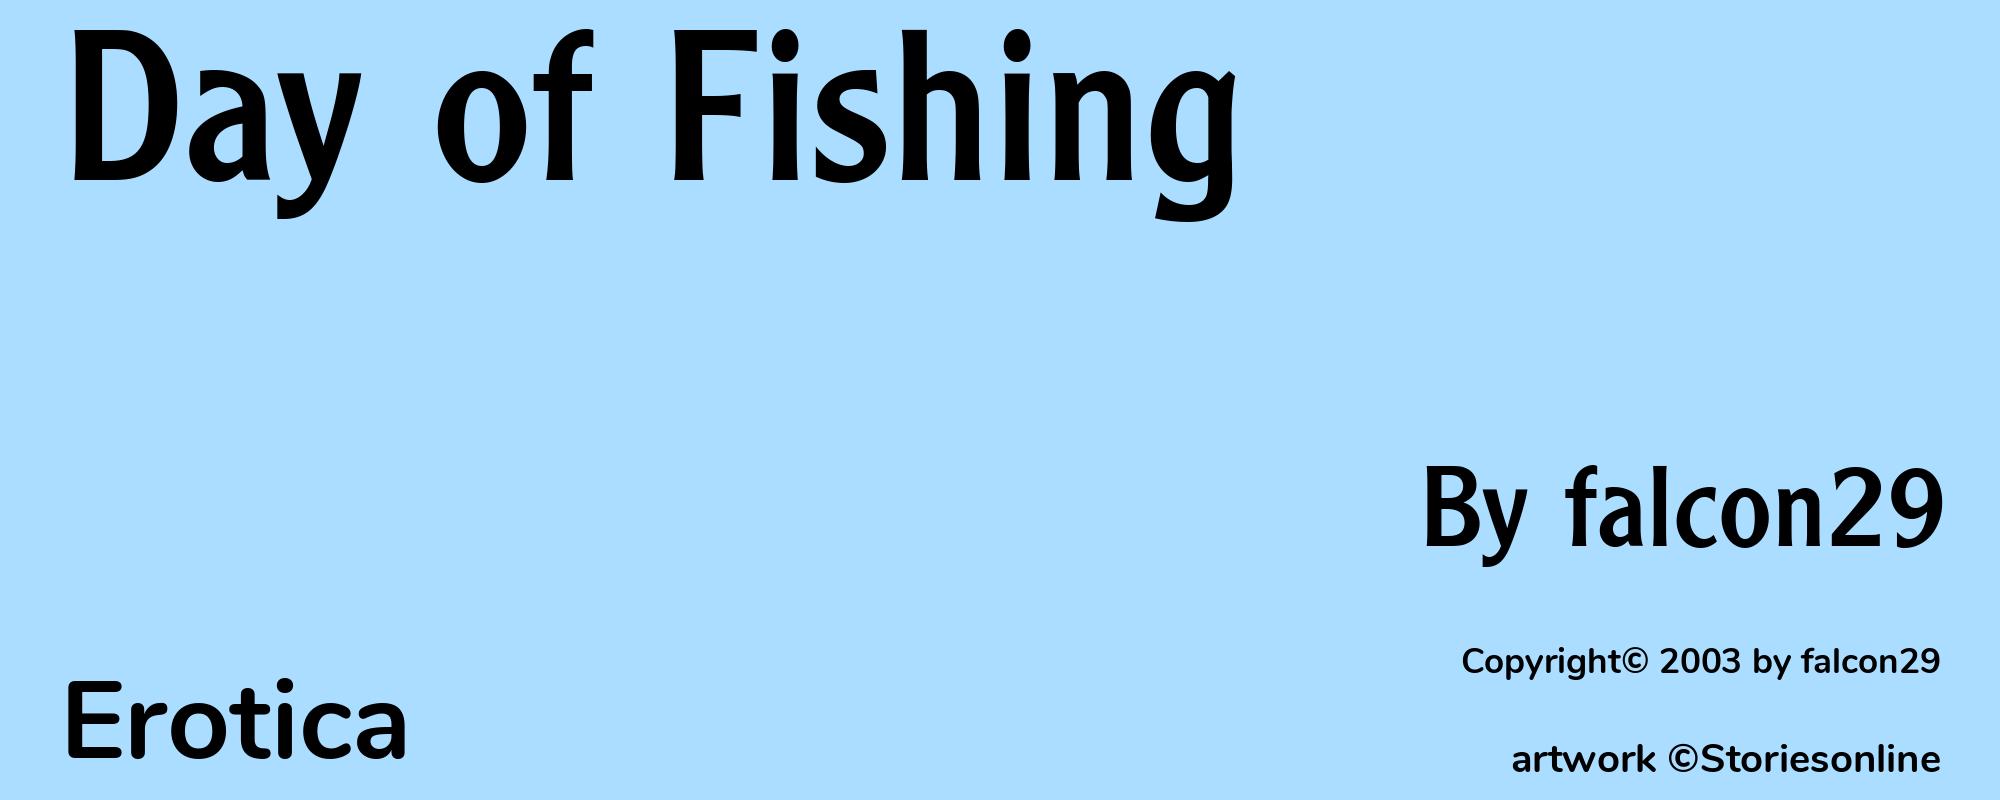 Day of Fishing - Cover